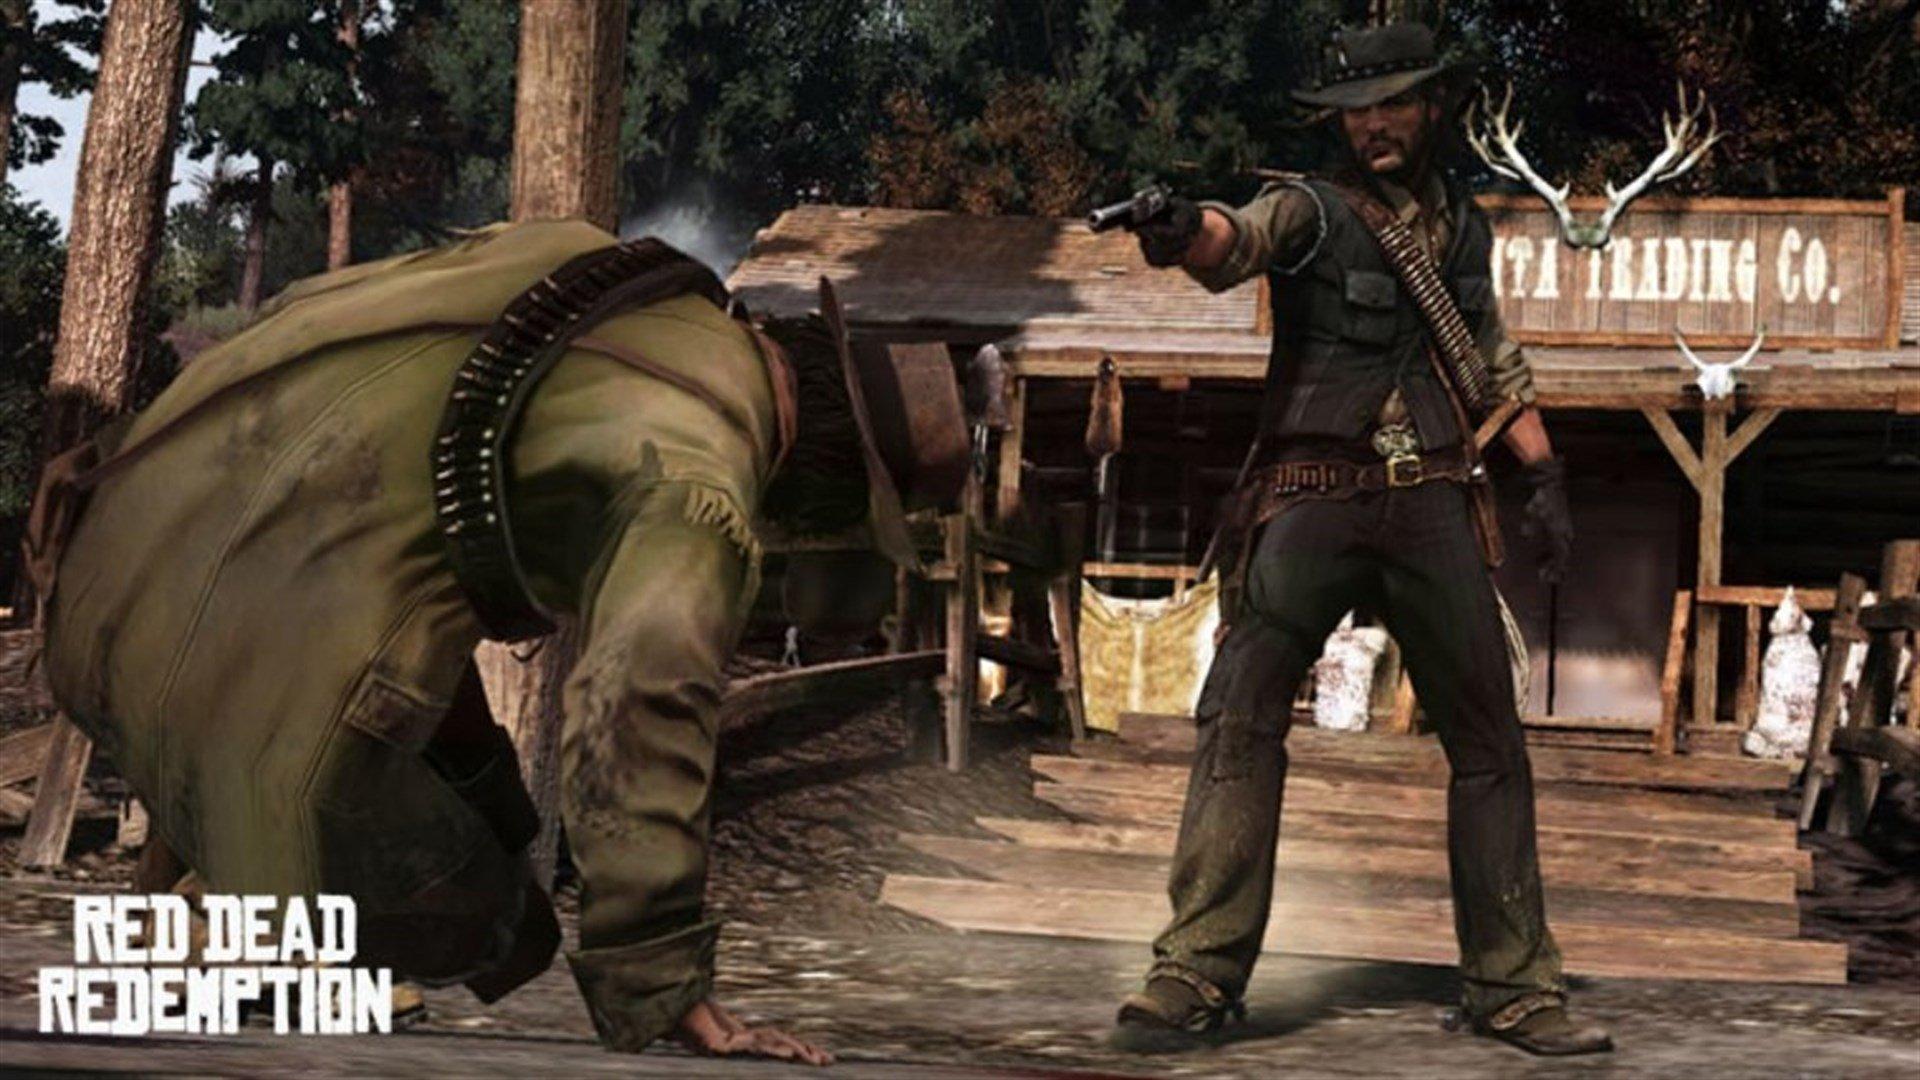 Red Dead Redemption Game of the Year Edition -Xbox 360, Xbox 360